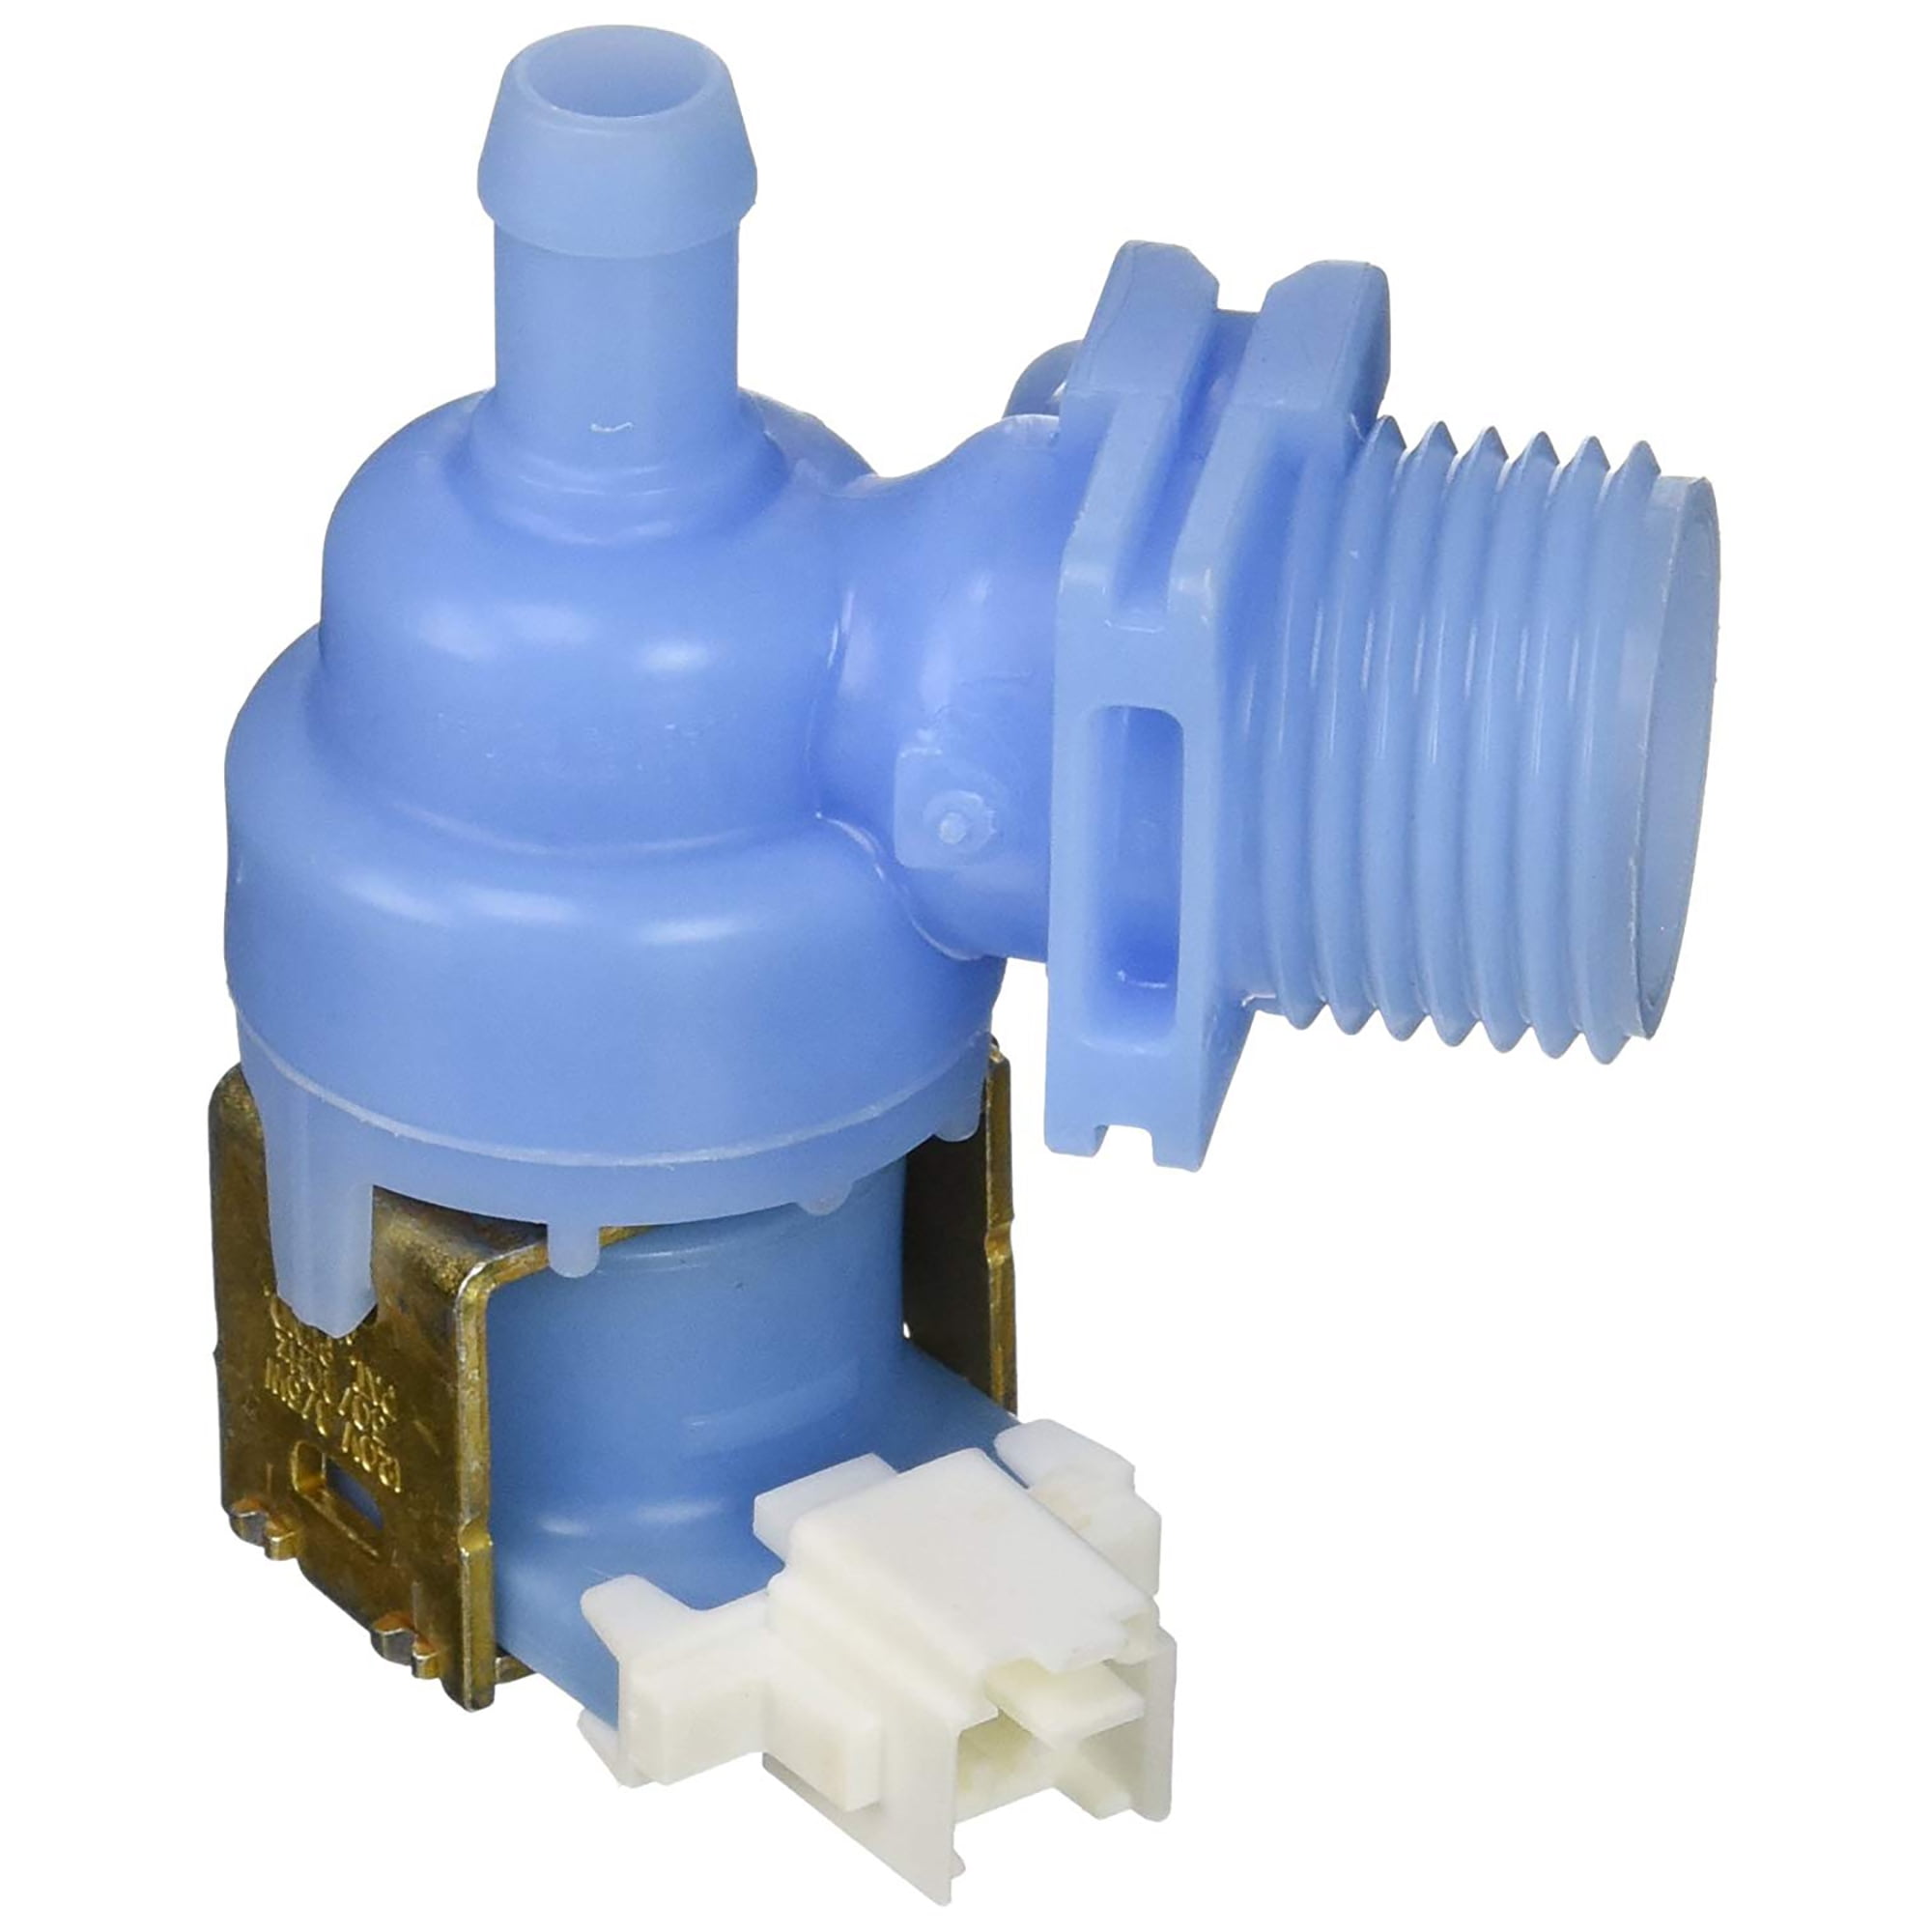 Endurance Pro W10327249 Dishwasher Inlet Water Valve Replacement for Whirlpool 